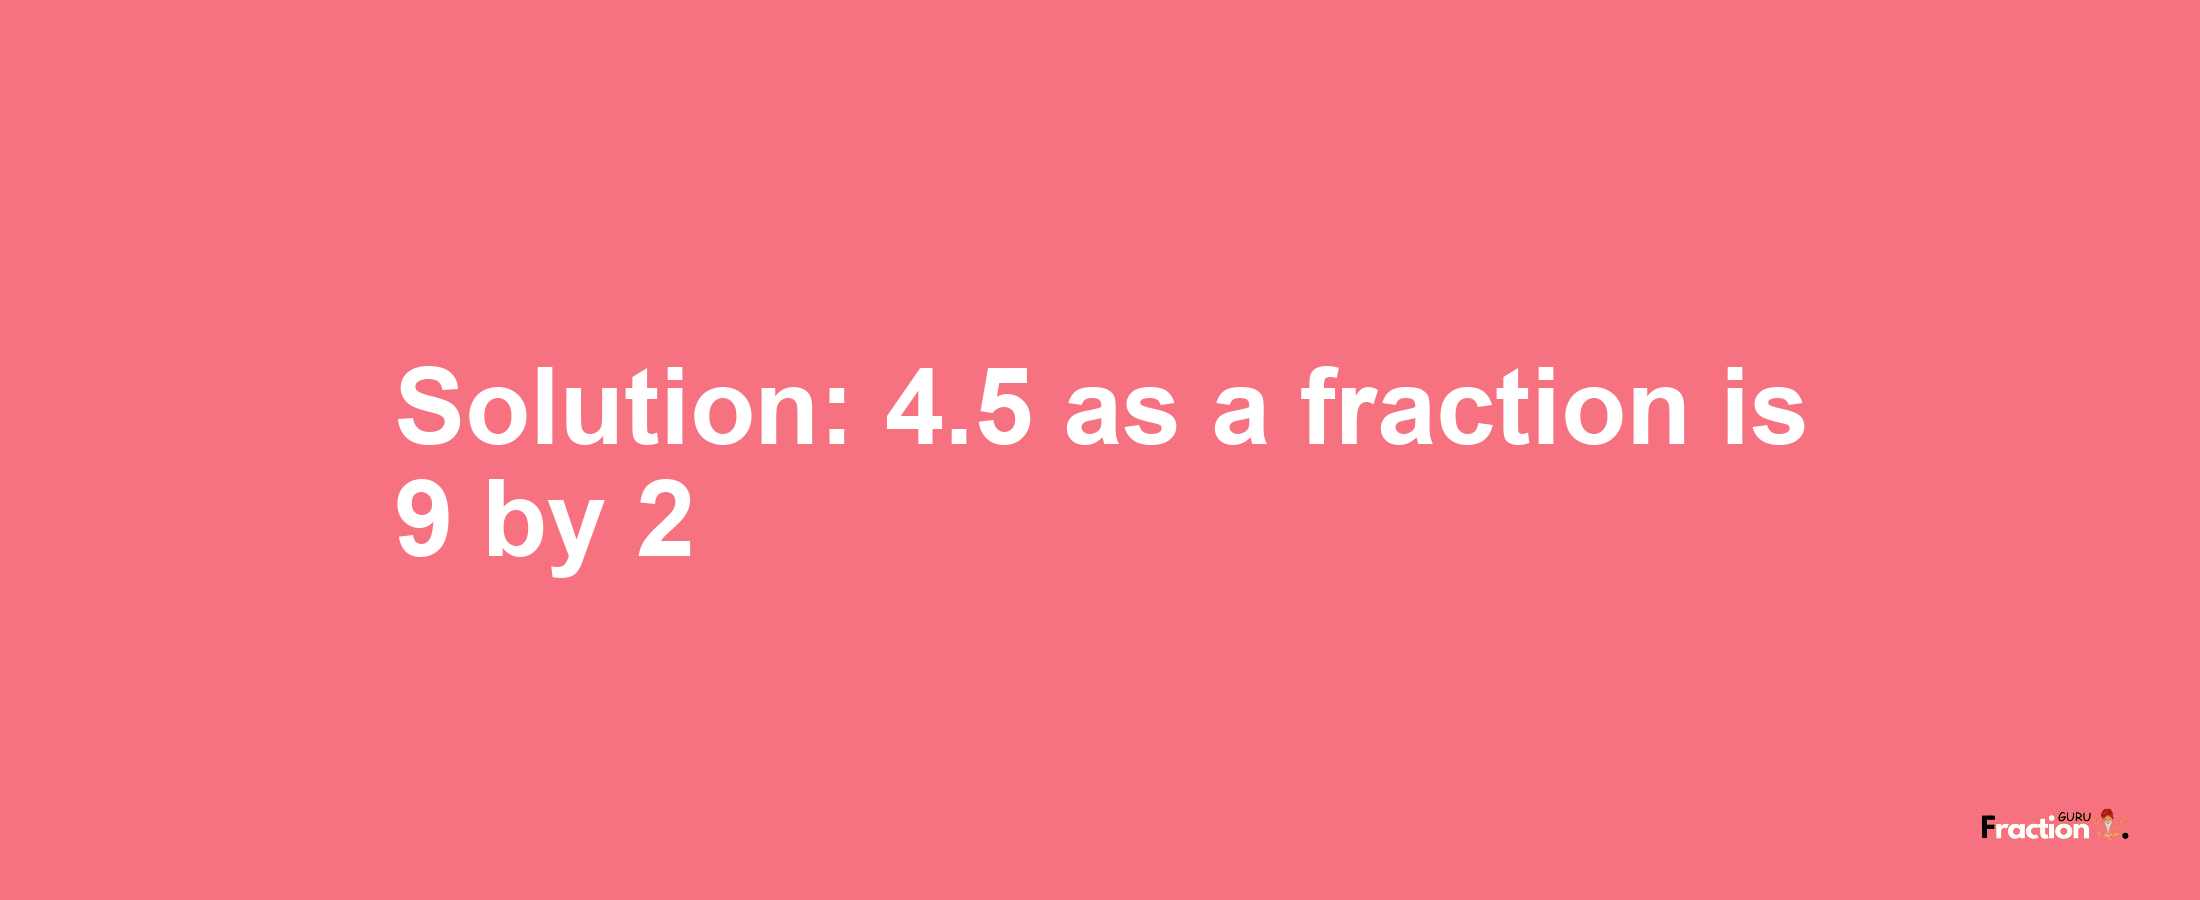 Solution:4.5 as a fraction is 9/2